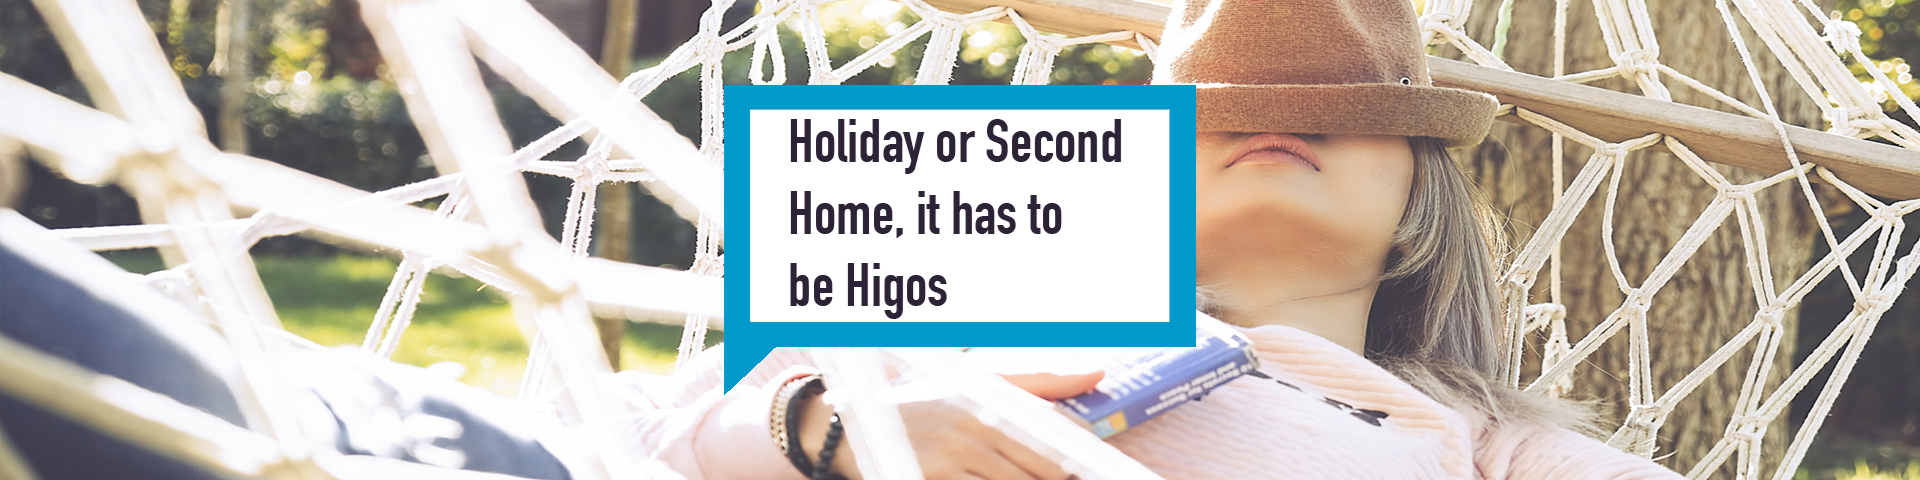 Higos holiday and second home